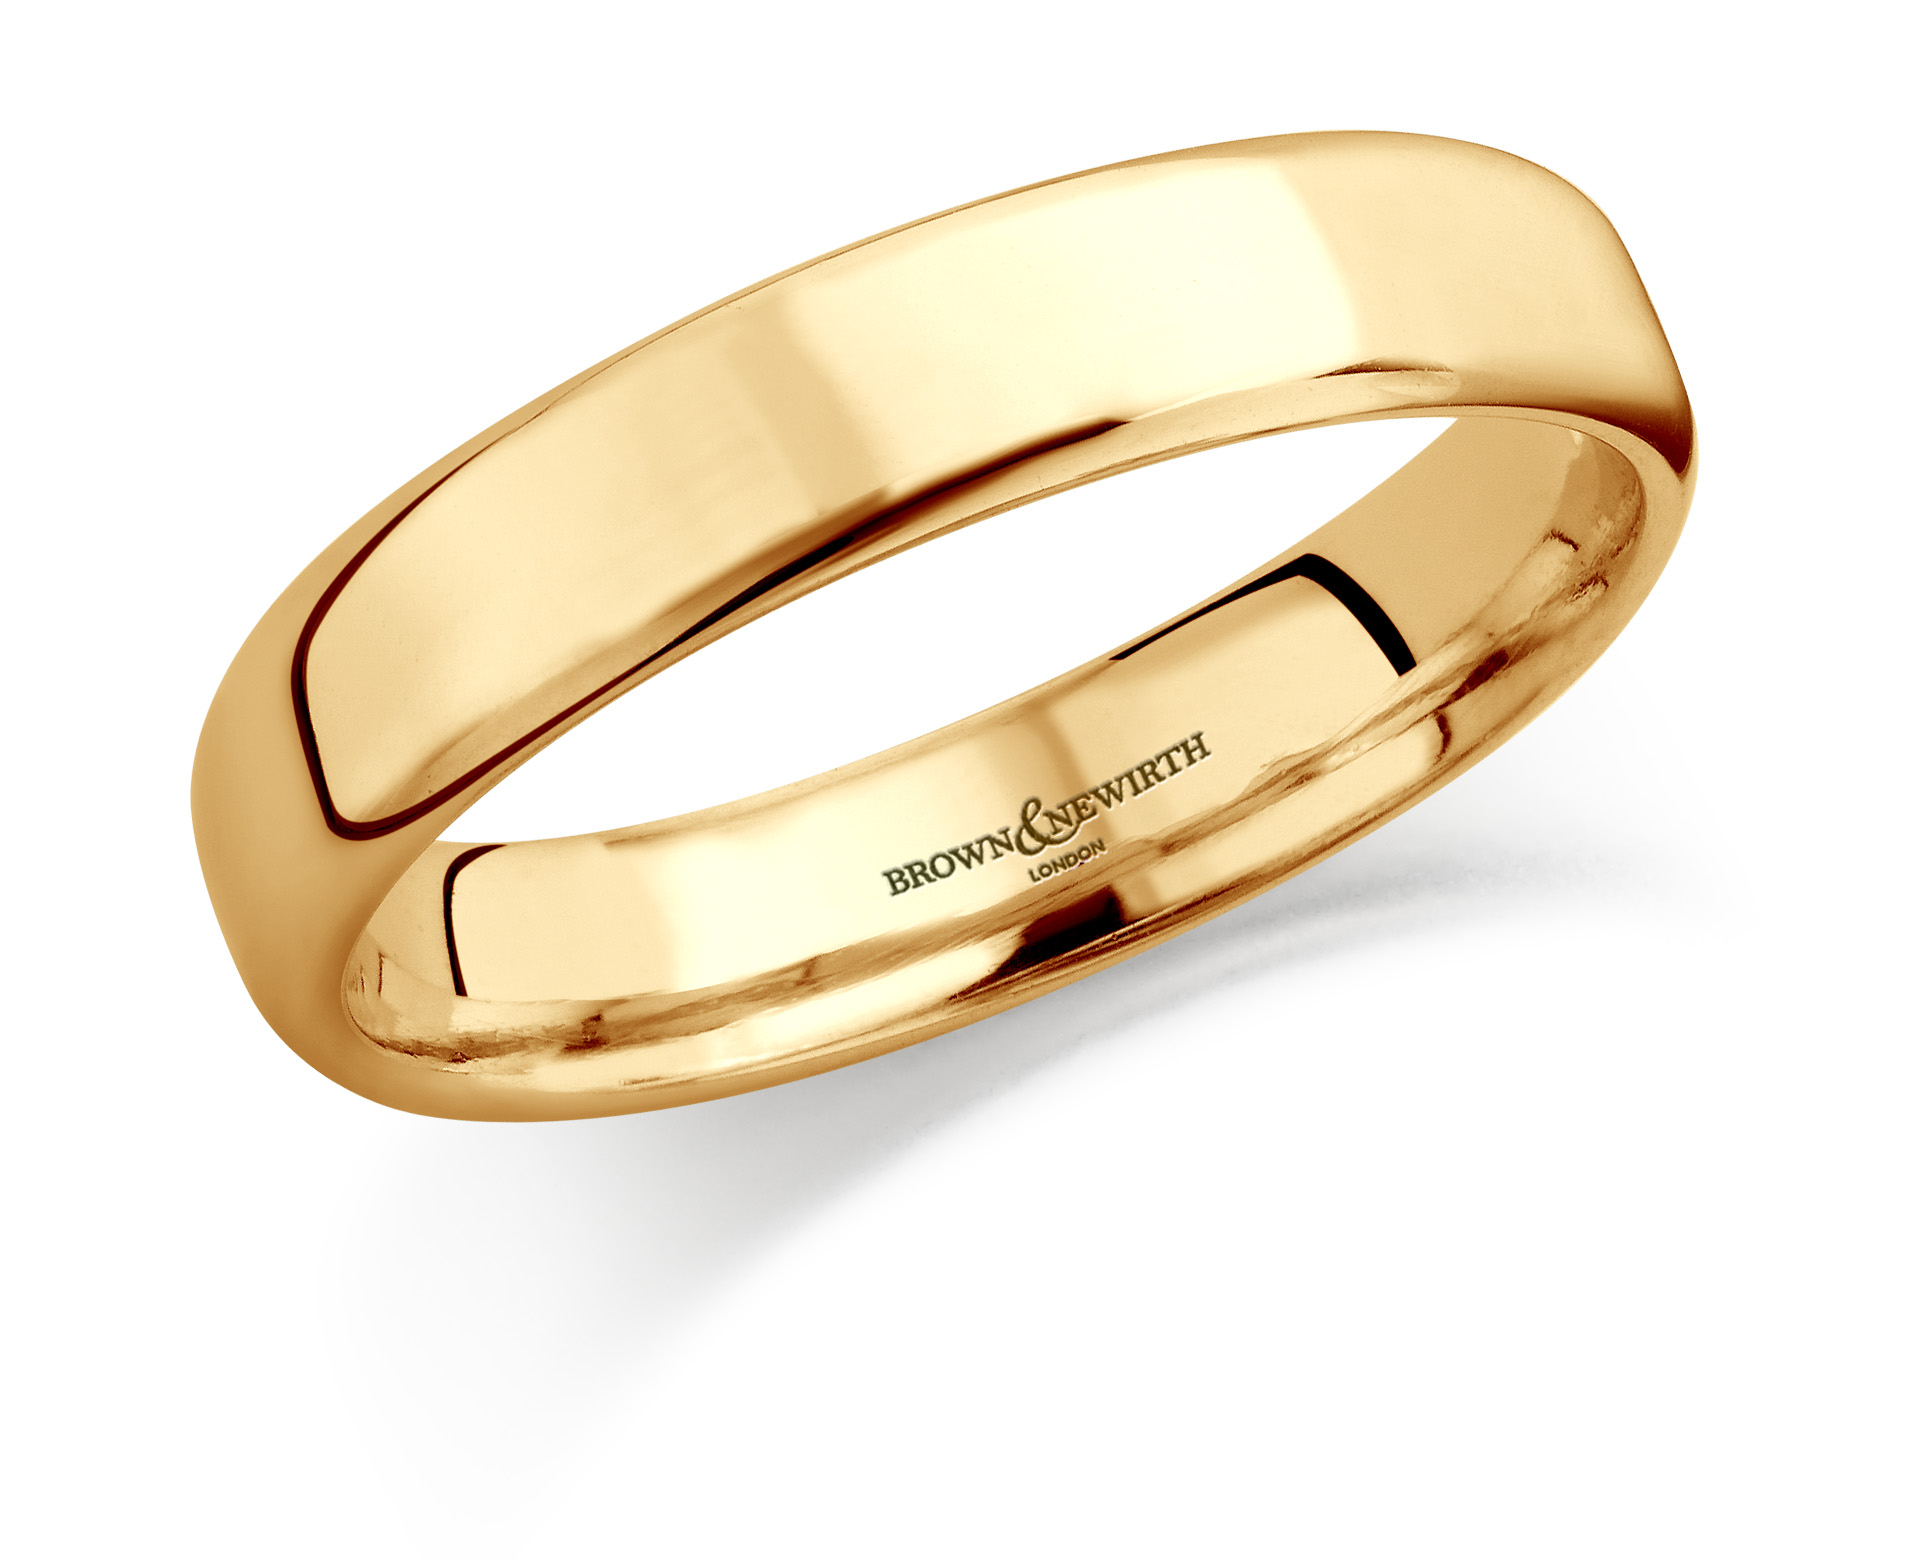 Brown & Newirth 'Perpetual' Wedding Band, For Her